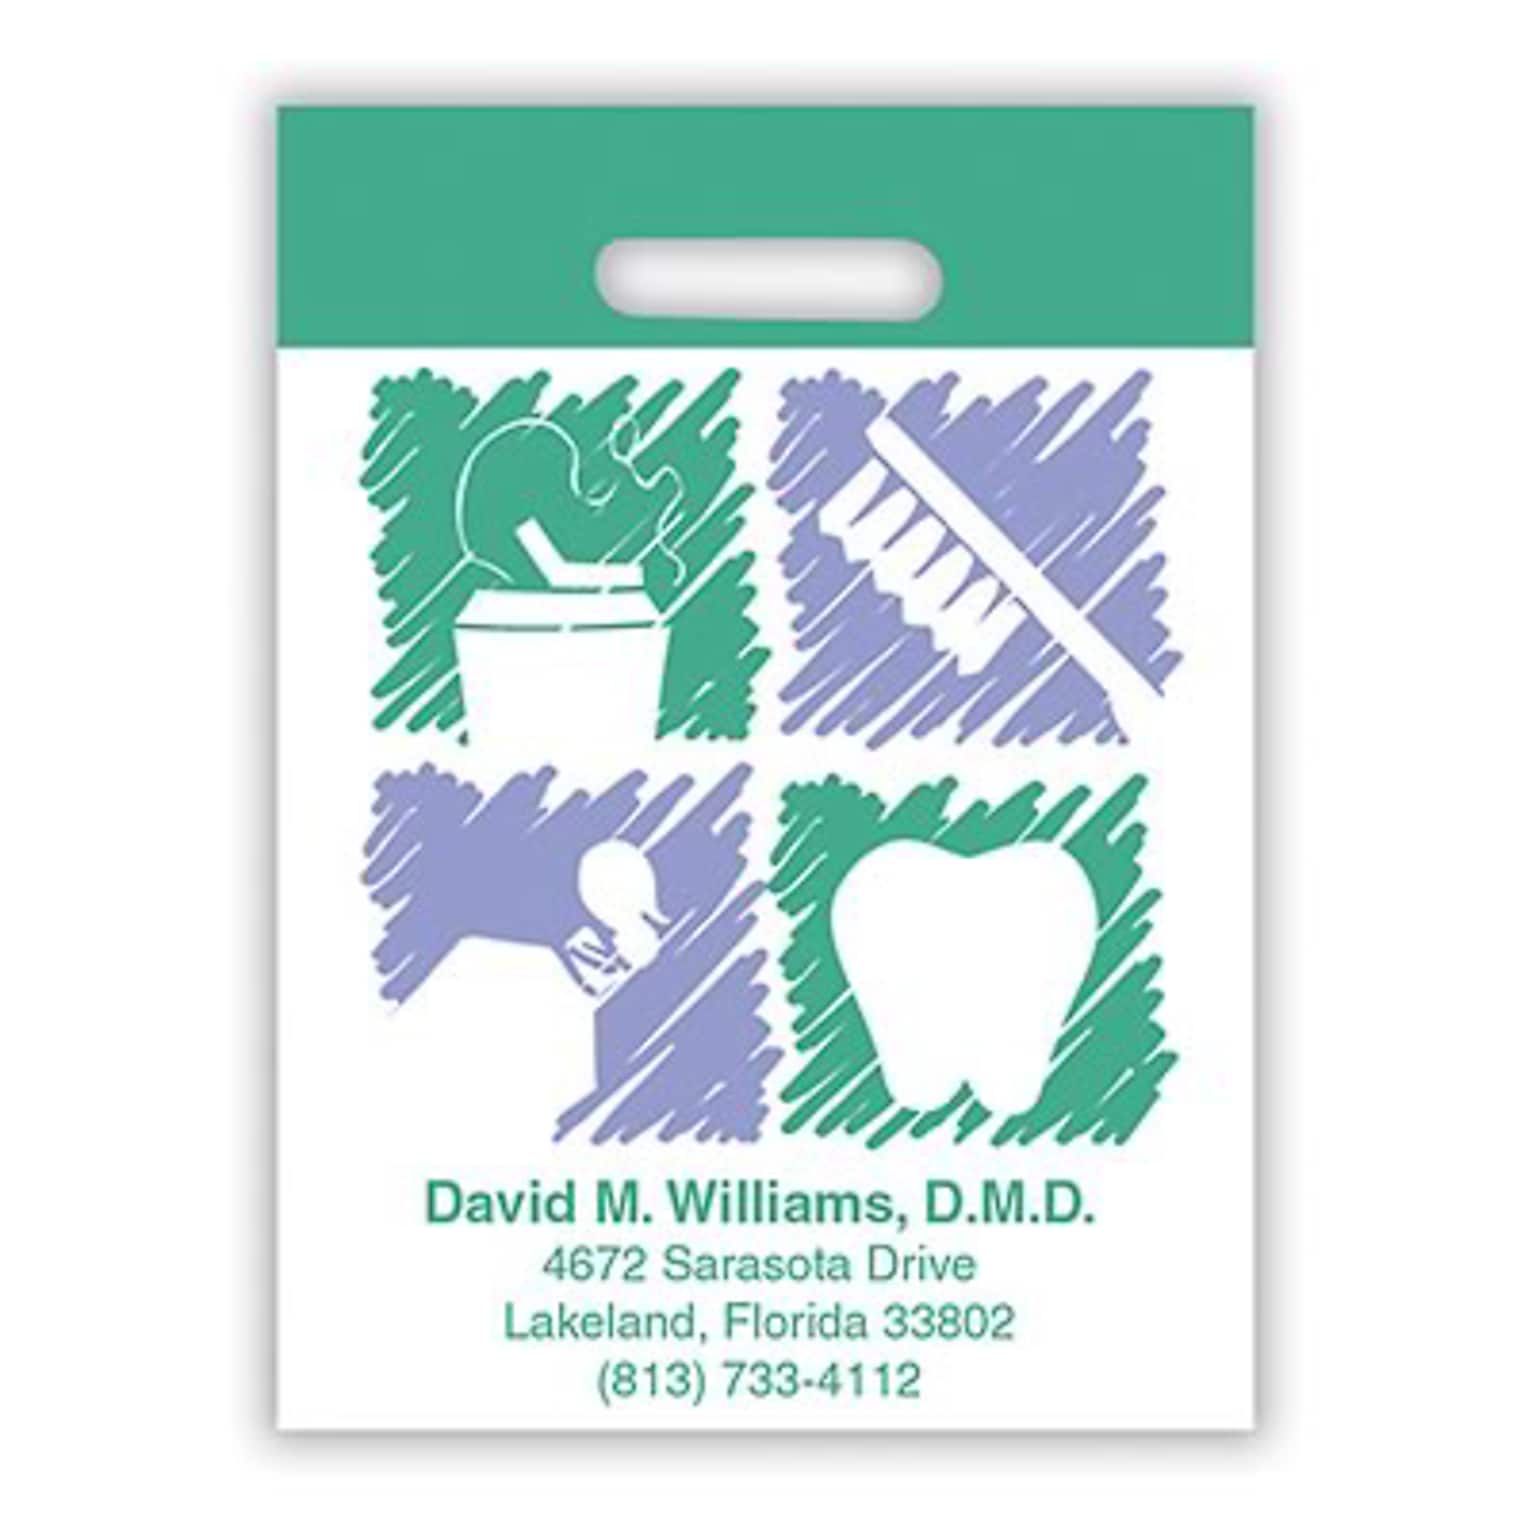 Medical Arts Press® Dental Personalized Large 2-Color Supply Bags; 9 x 13, Purple/Green, Dental Graphics, 100 Bags, (53779)